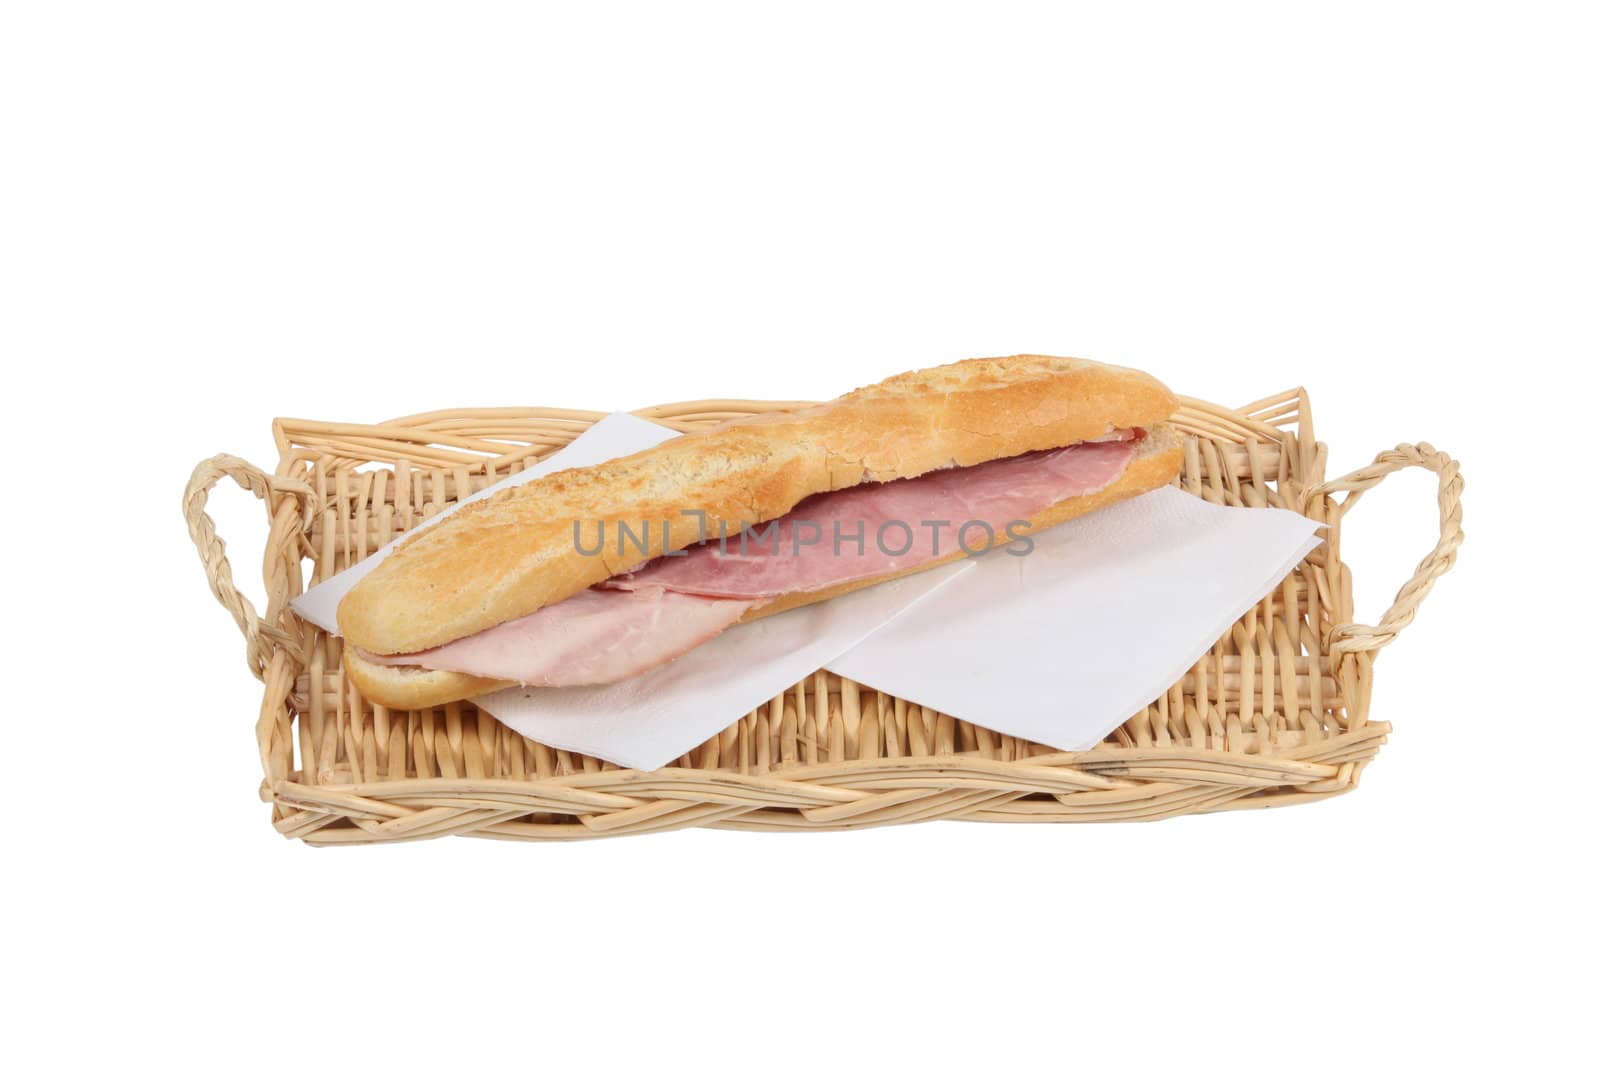 Simple ham baguette on a wicker tray by phovoir